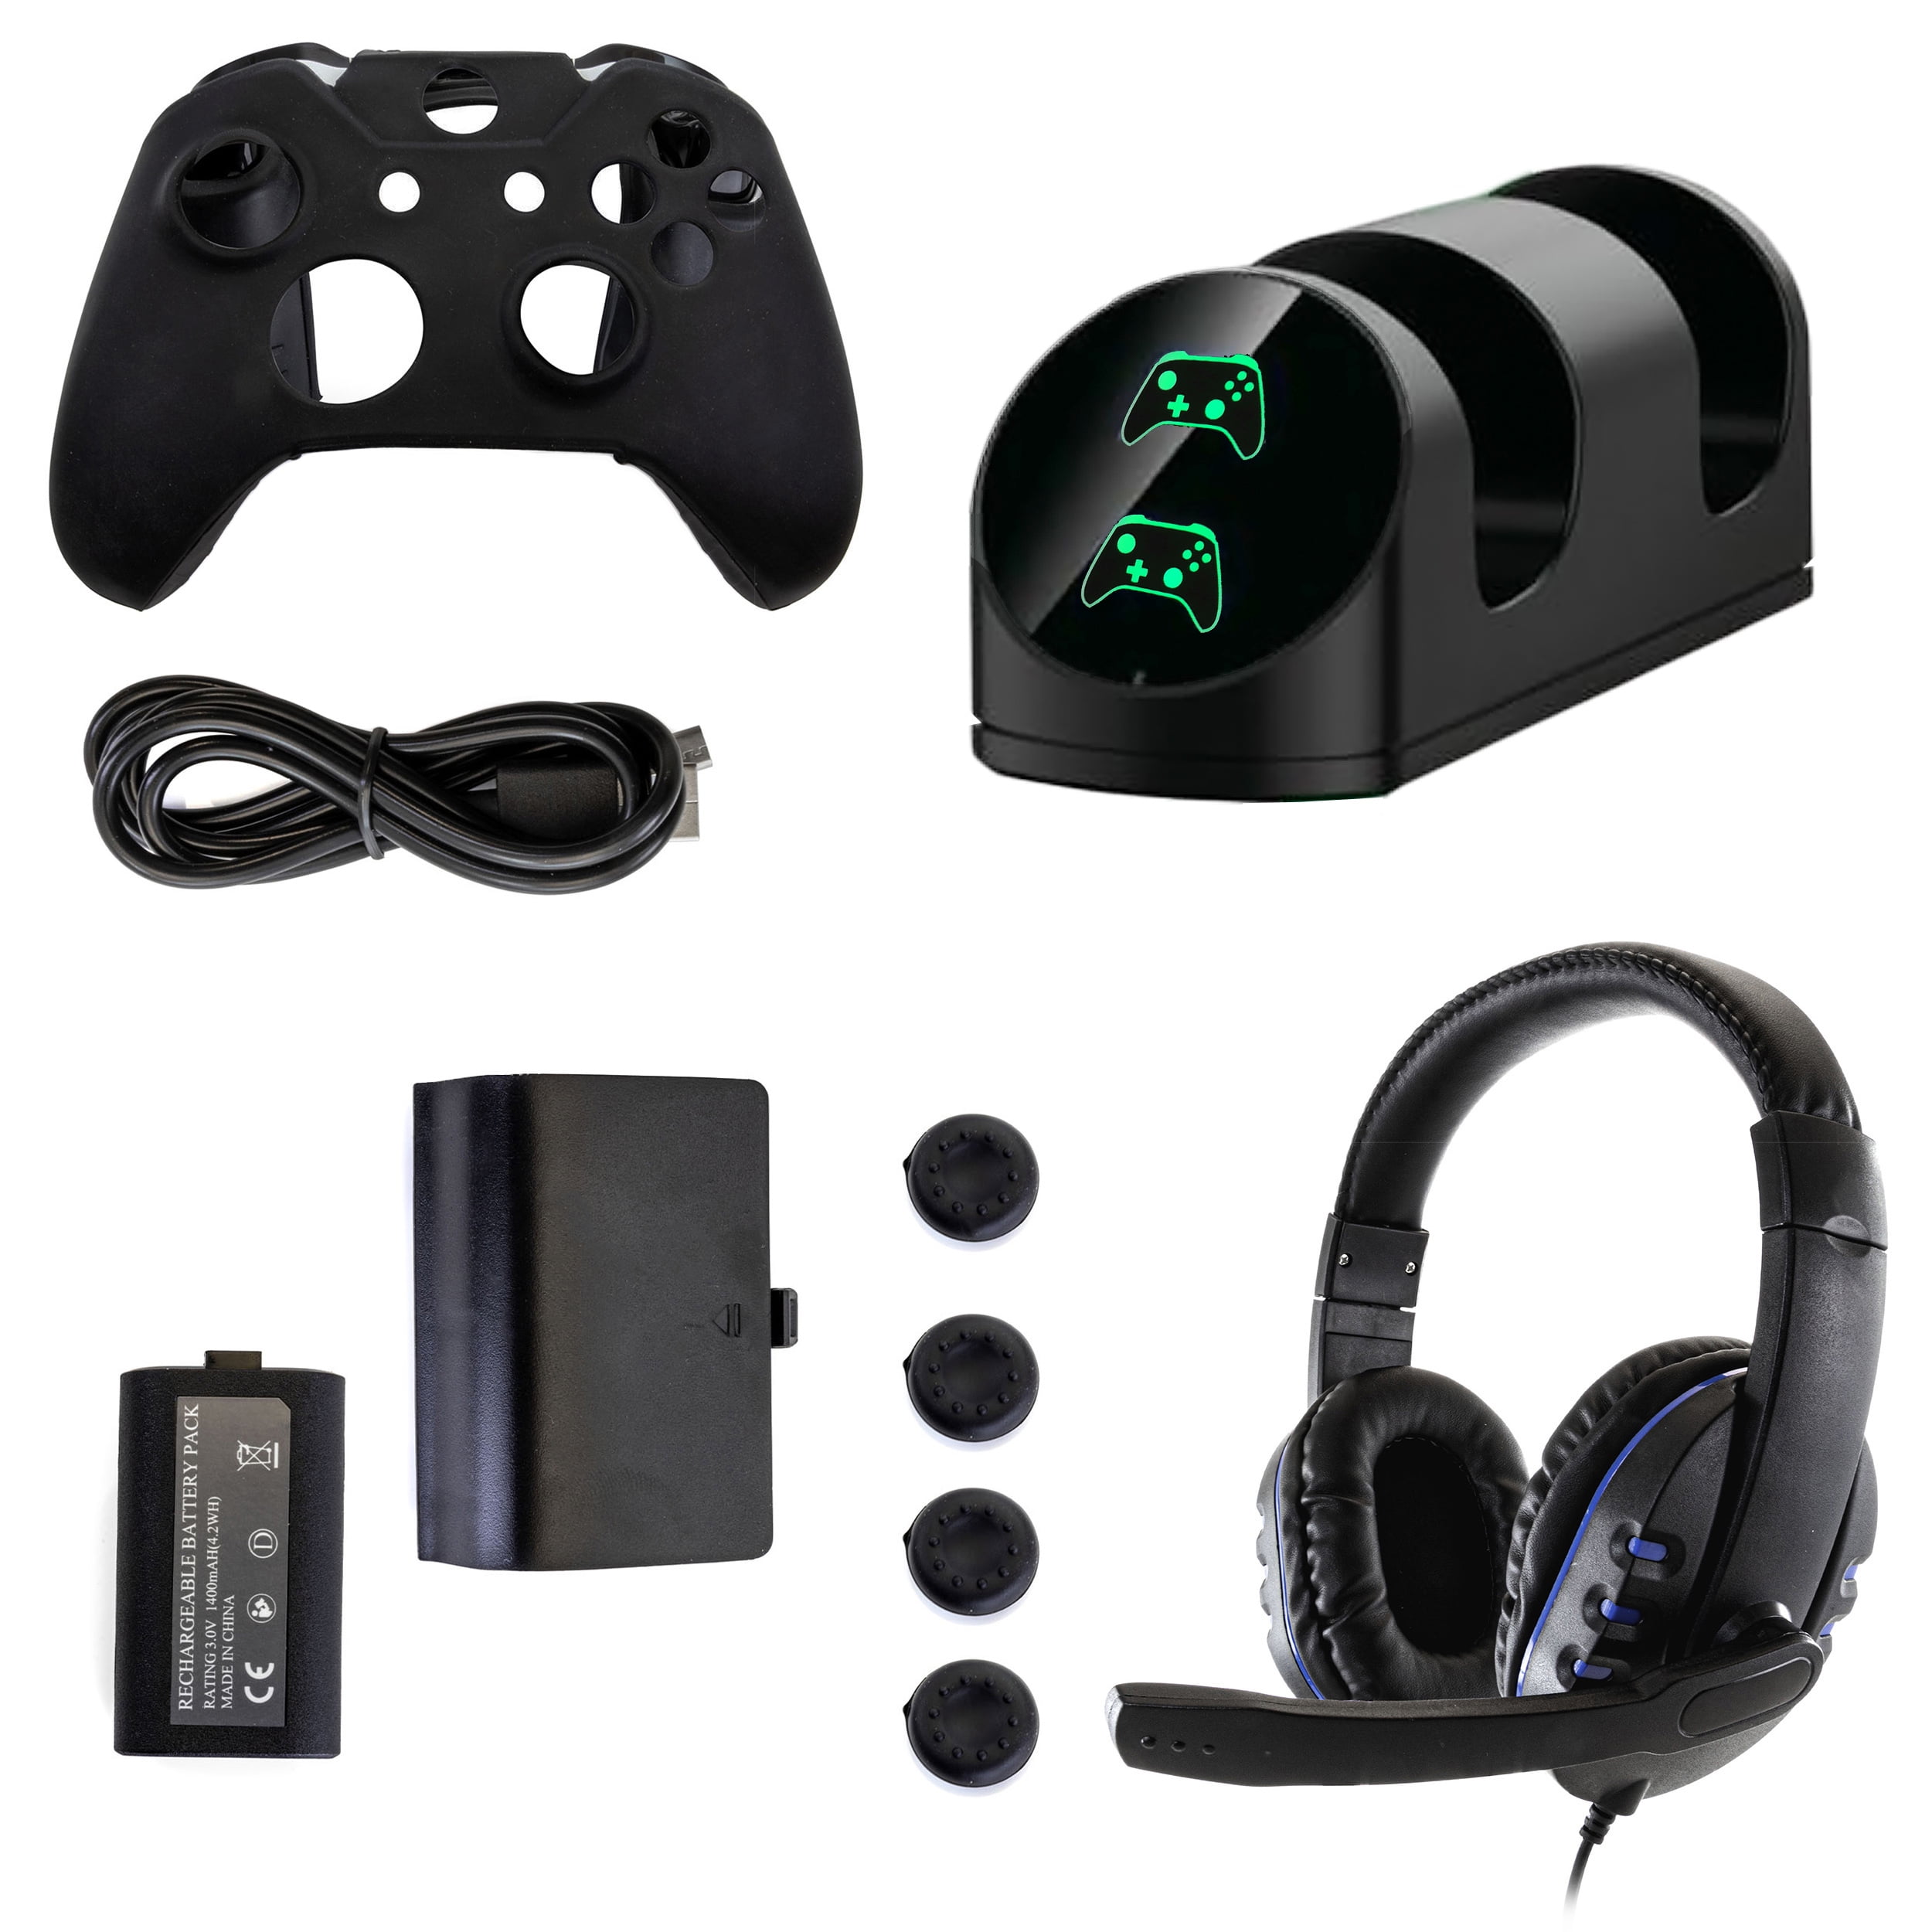  Xbox Series S – Starter Bundle - Includes hundreds of games  with Game Pass Ultimate 3 Month Membership - 512GB SSD All-Digital Gaming  Console : Todo lo demás